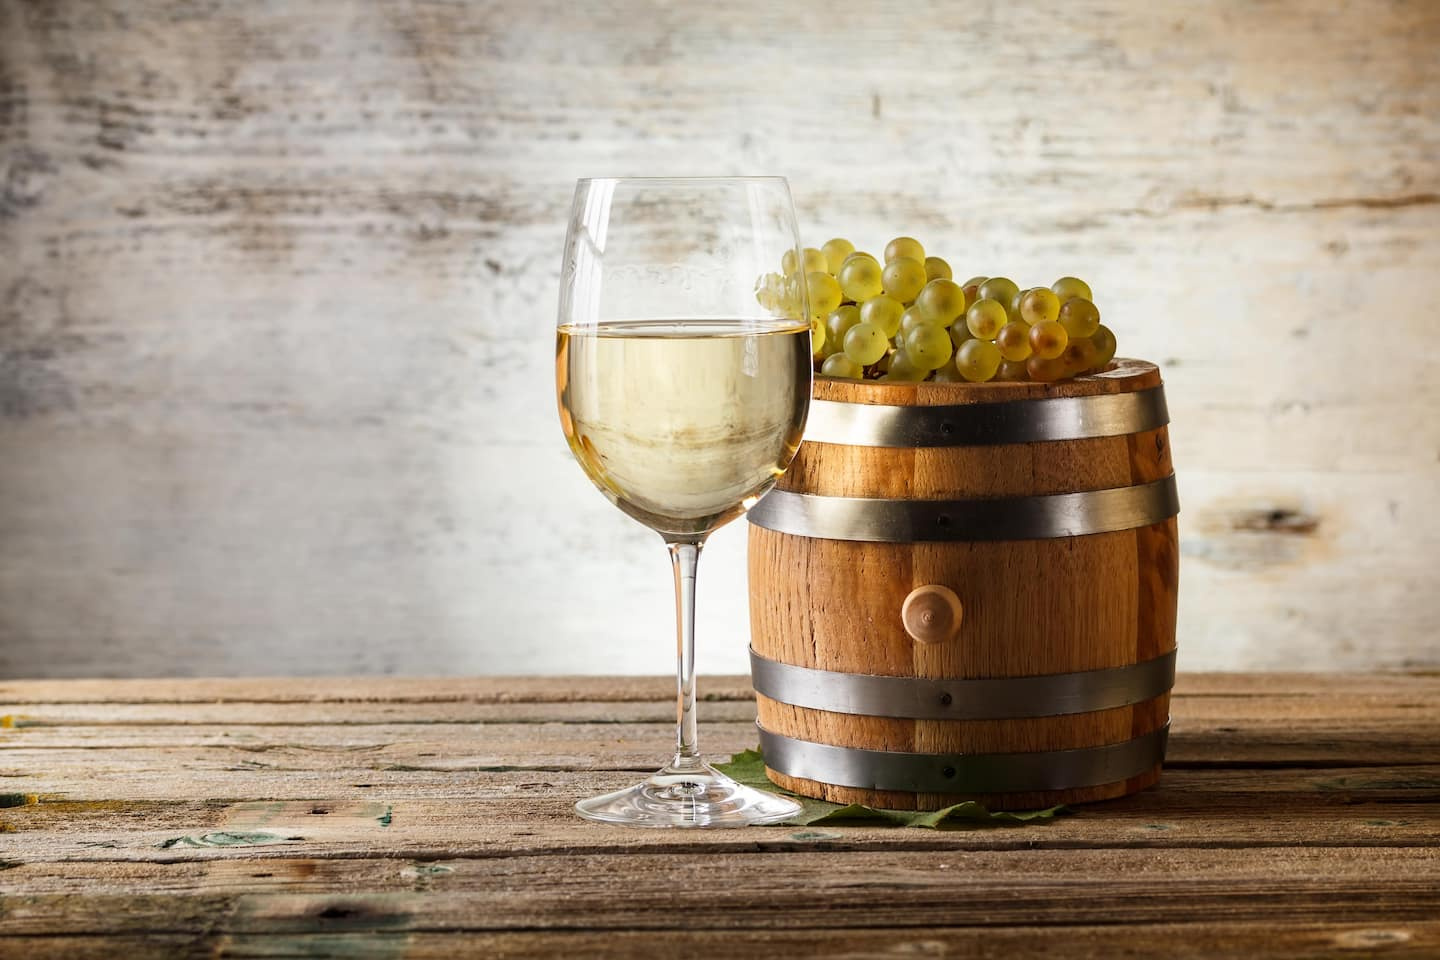 Four good dry and fresh white wines